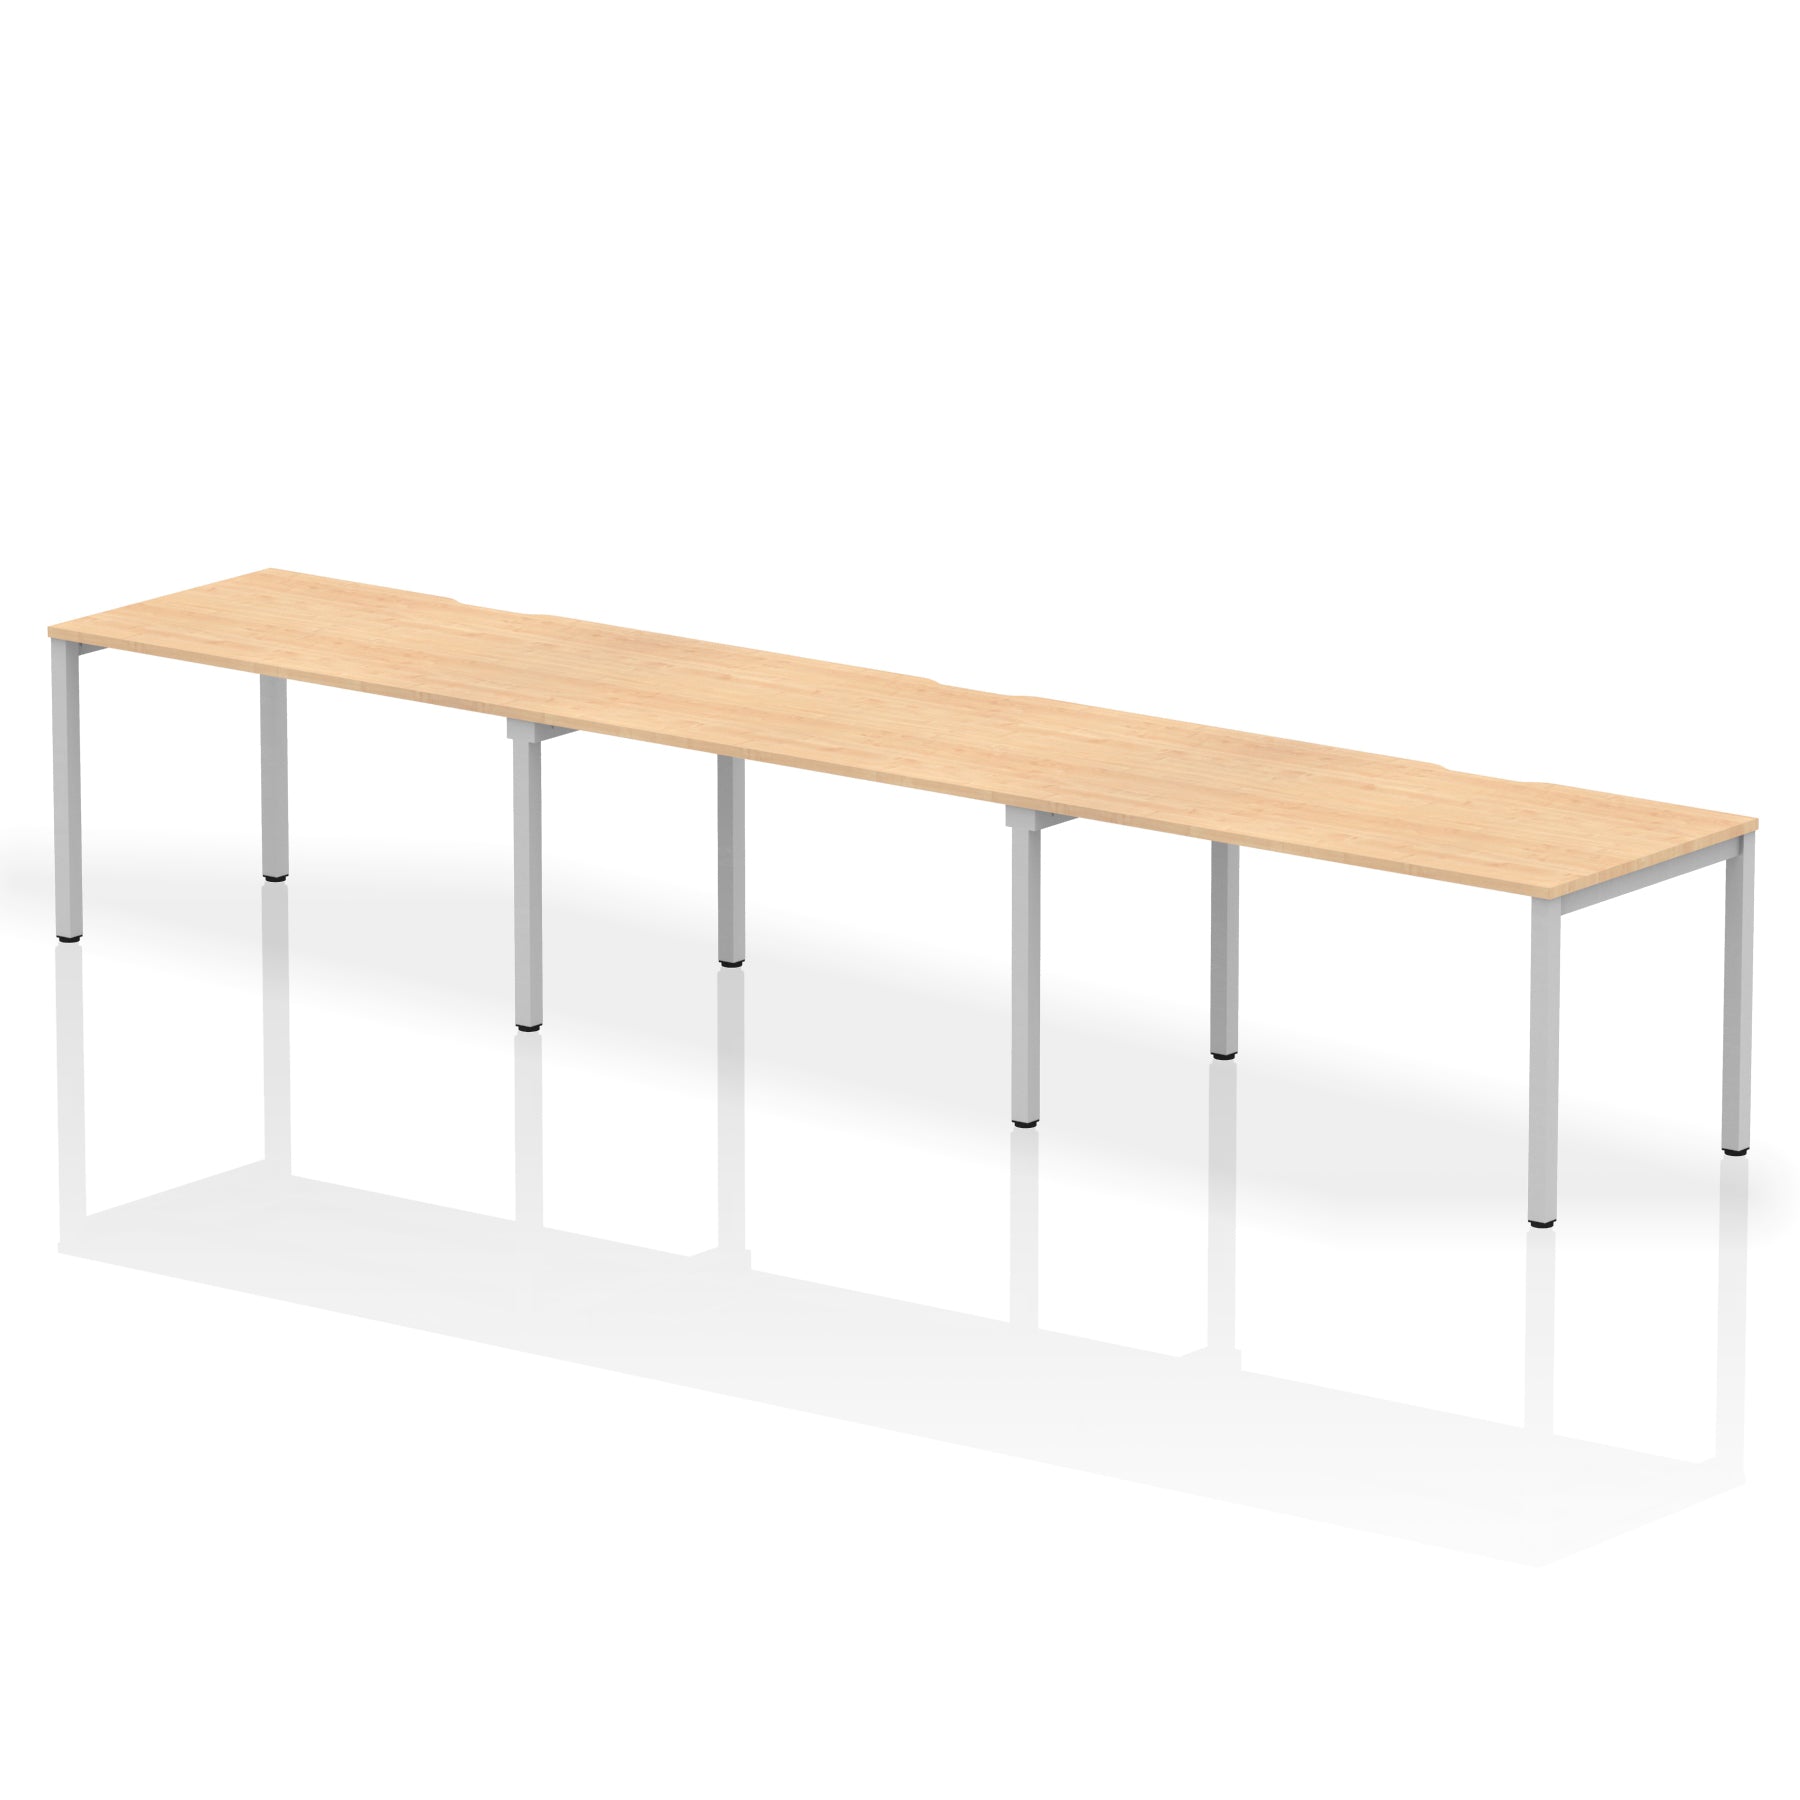 Evolve Plus 3-Person Single Row Desk - Rectangular MFC Top, Box Frame Legs, Self-Assembly, 5-Year Guarantee - 3600/4200/4800x800mm